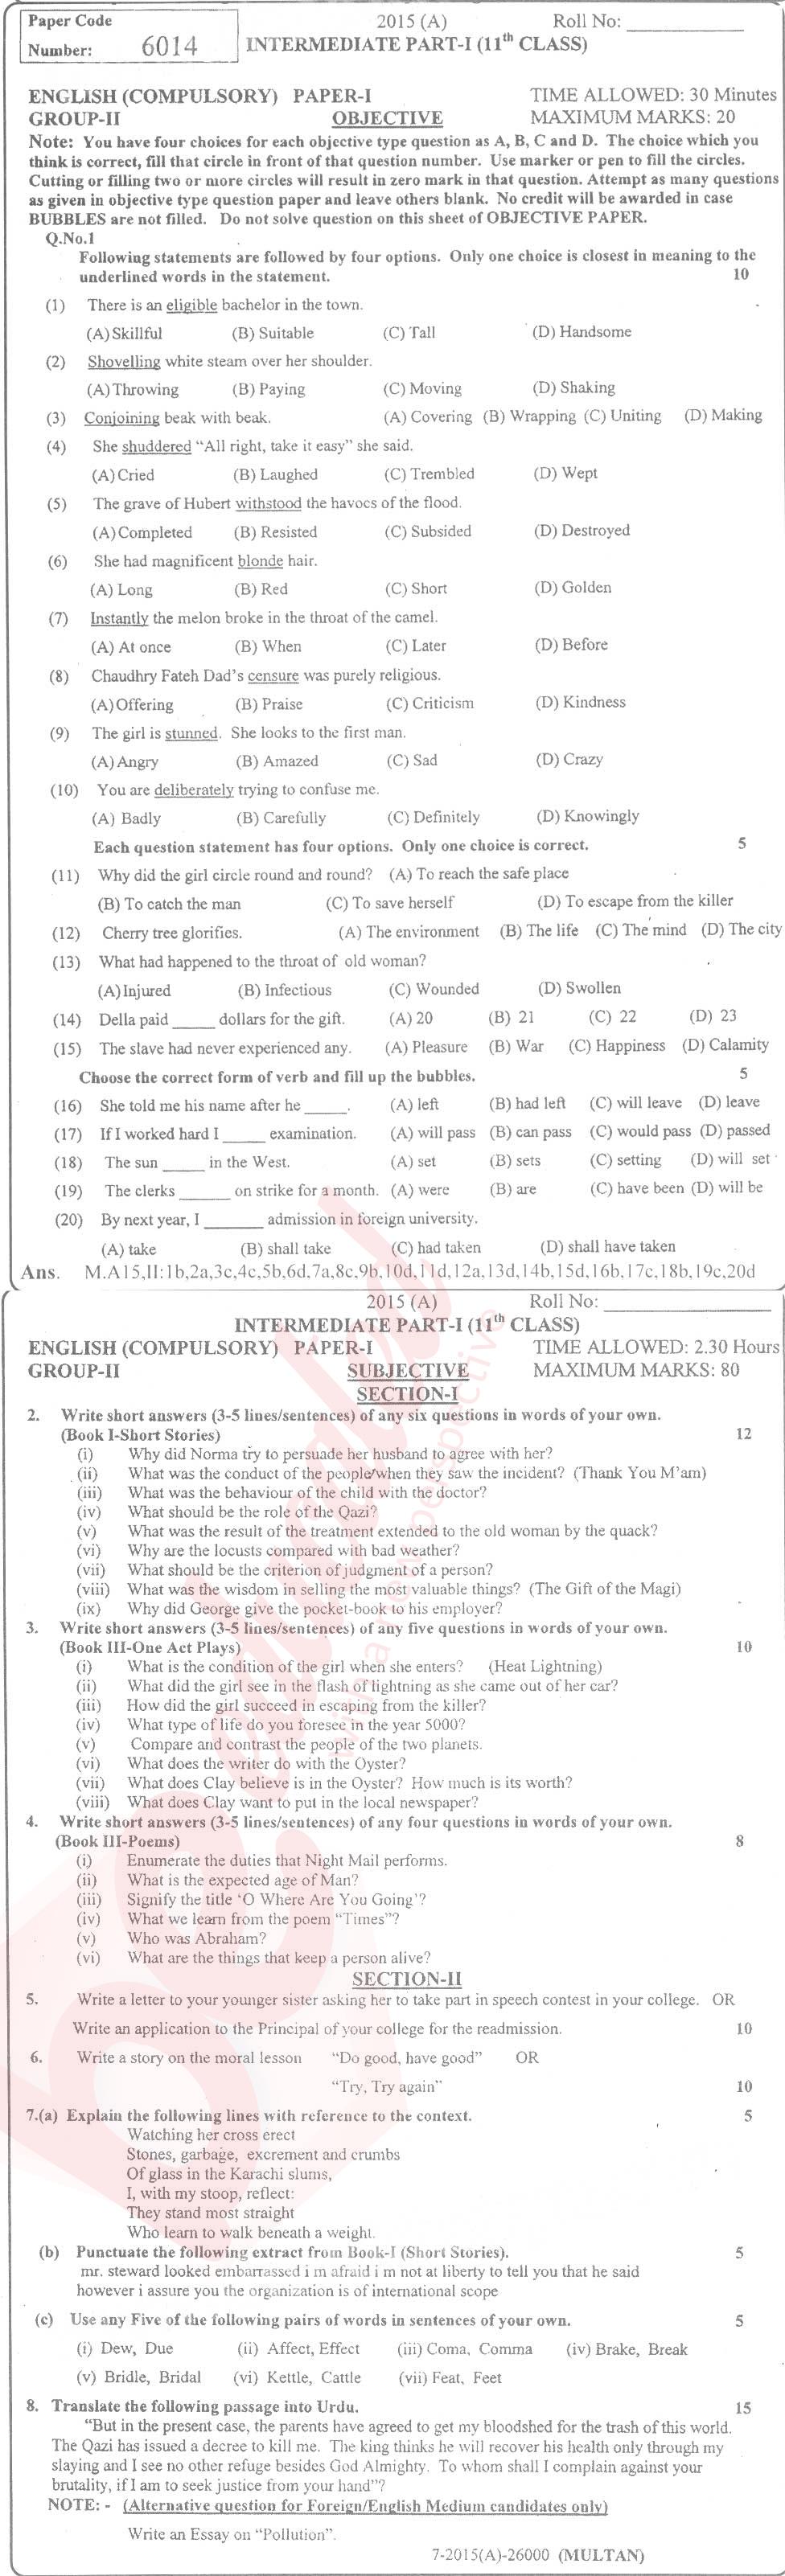 English 11th class Past Paper Group 2 BISE Multan 2015